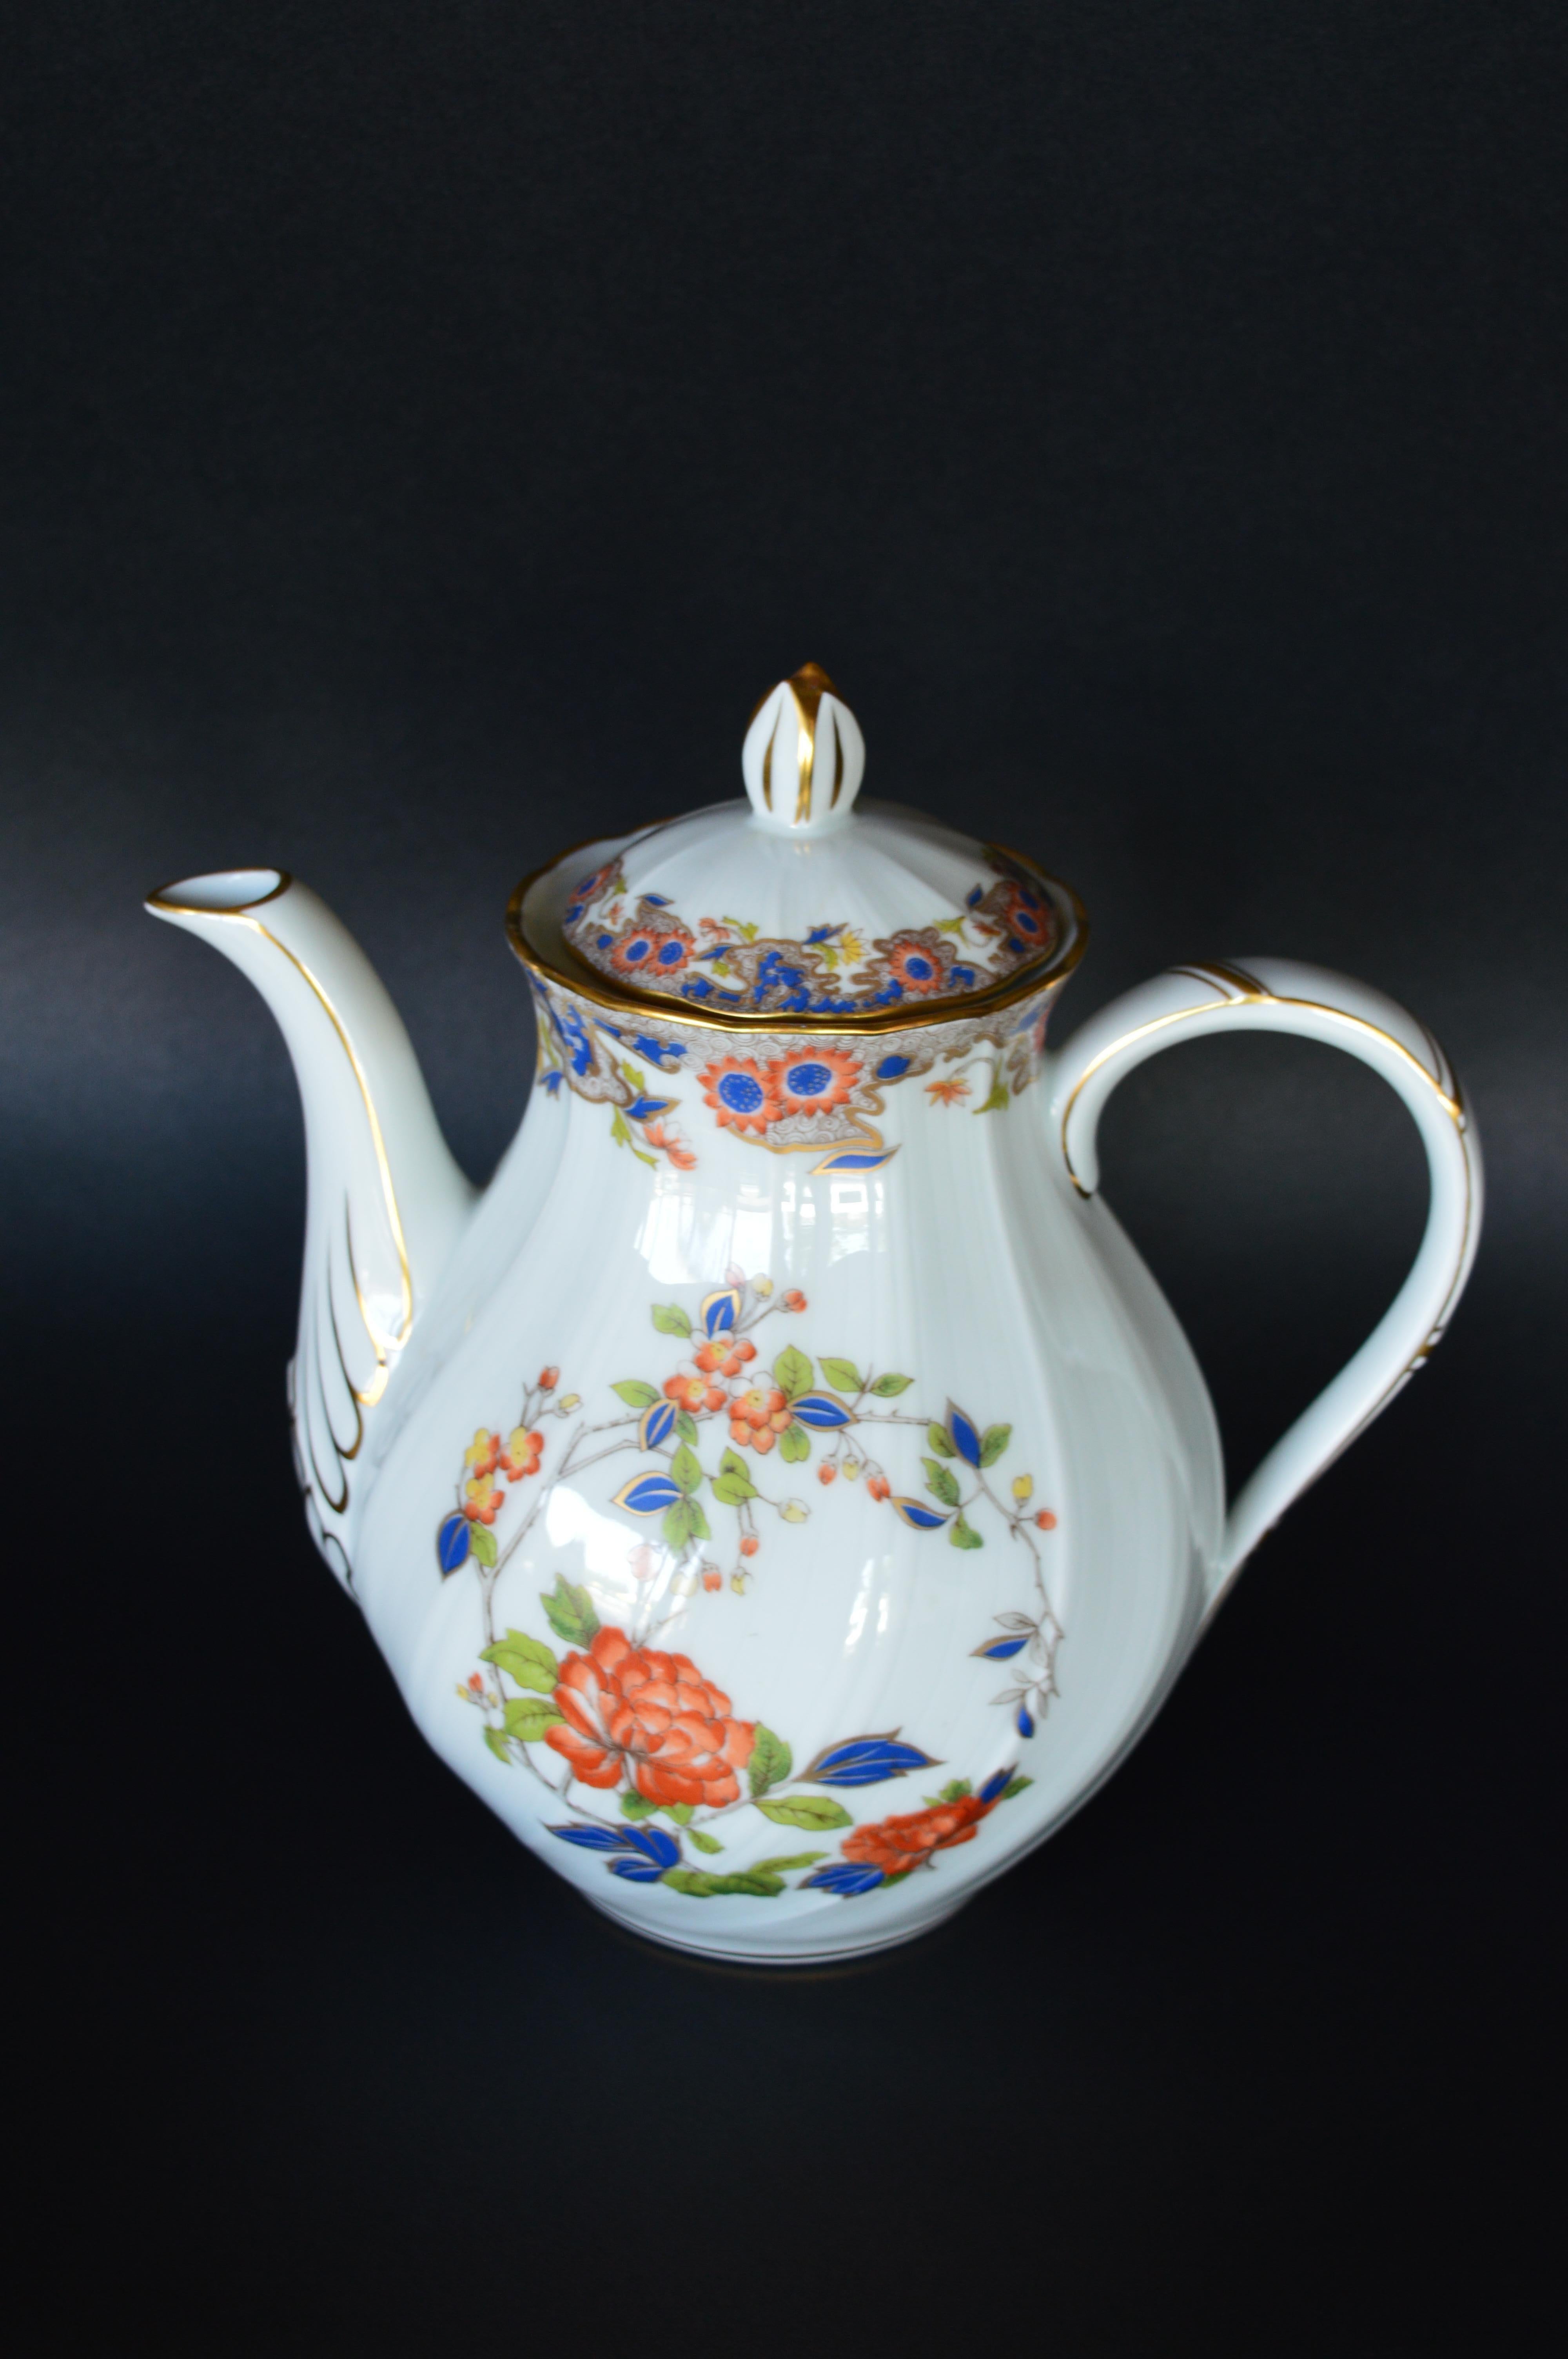 Porcelain Early 20th Century French Tea Set by Bernardaud Limoges